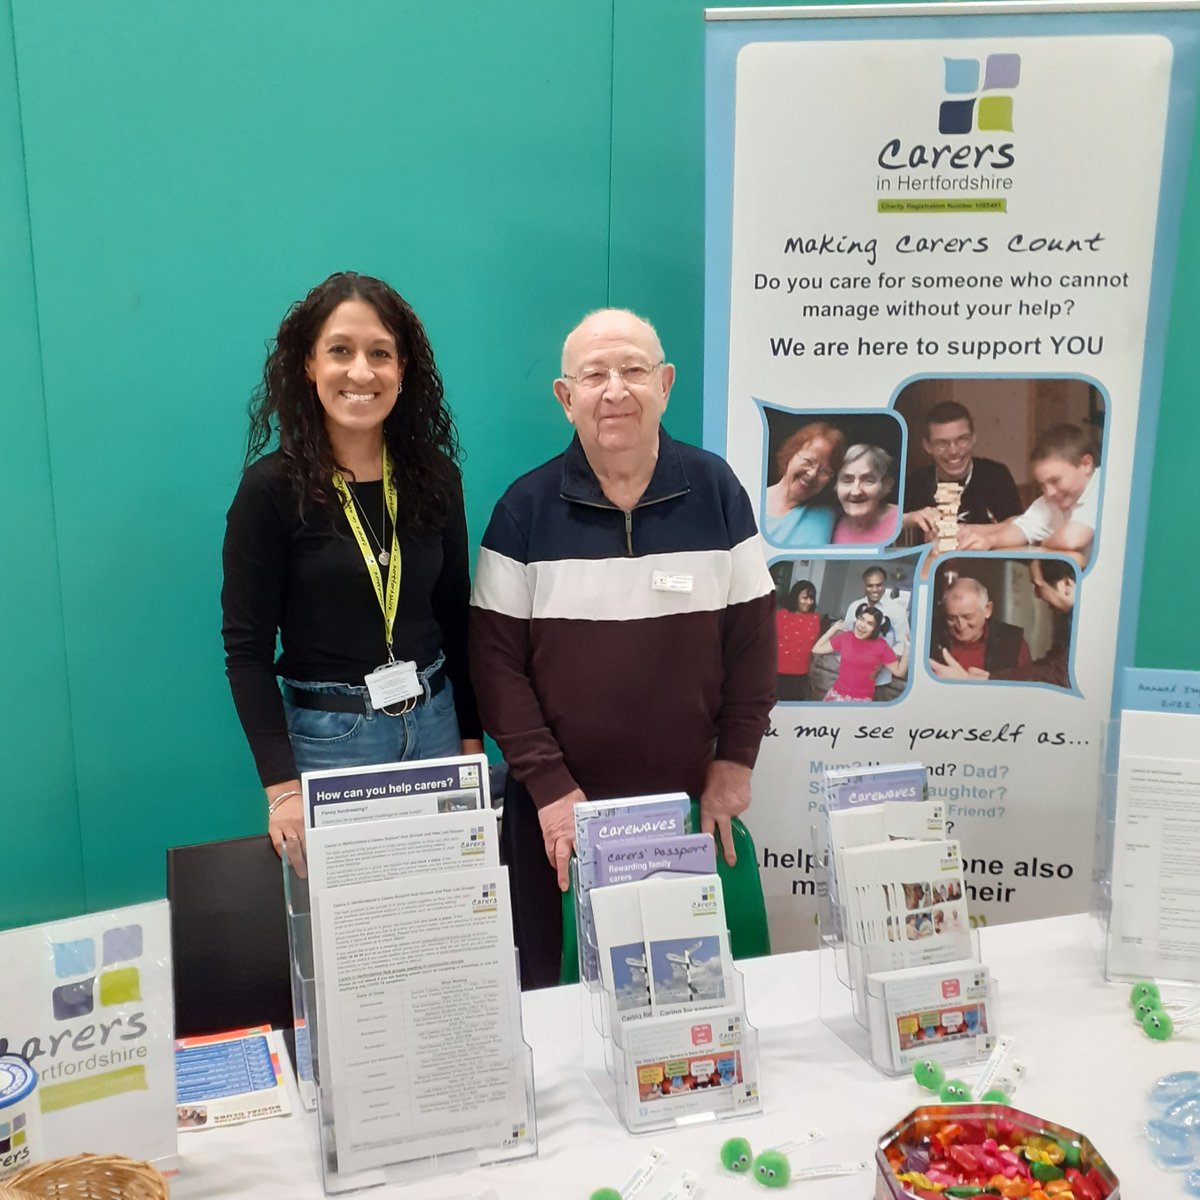 We really enjoyed attending the South Oxhey Community Fair on Saturday. It was a great chance to talk to the local community and other organisations about #makingcarerscount. Thank you to @ThreeRiversDC for arranging the event and accommodating us!